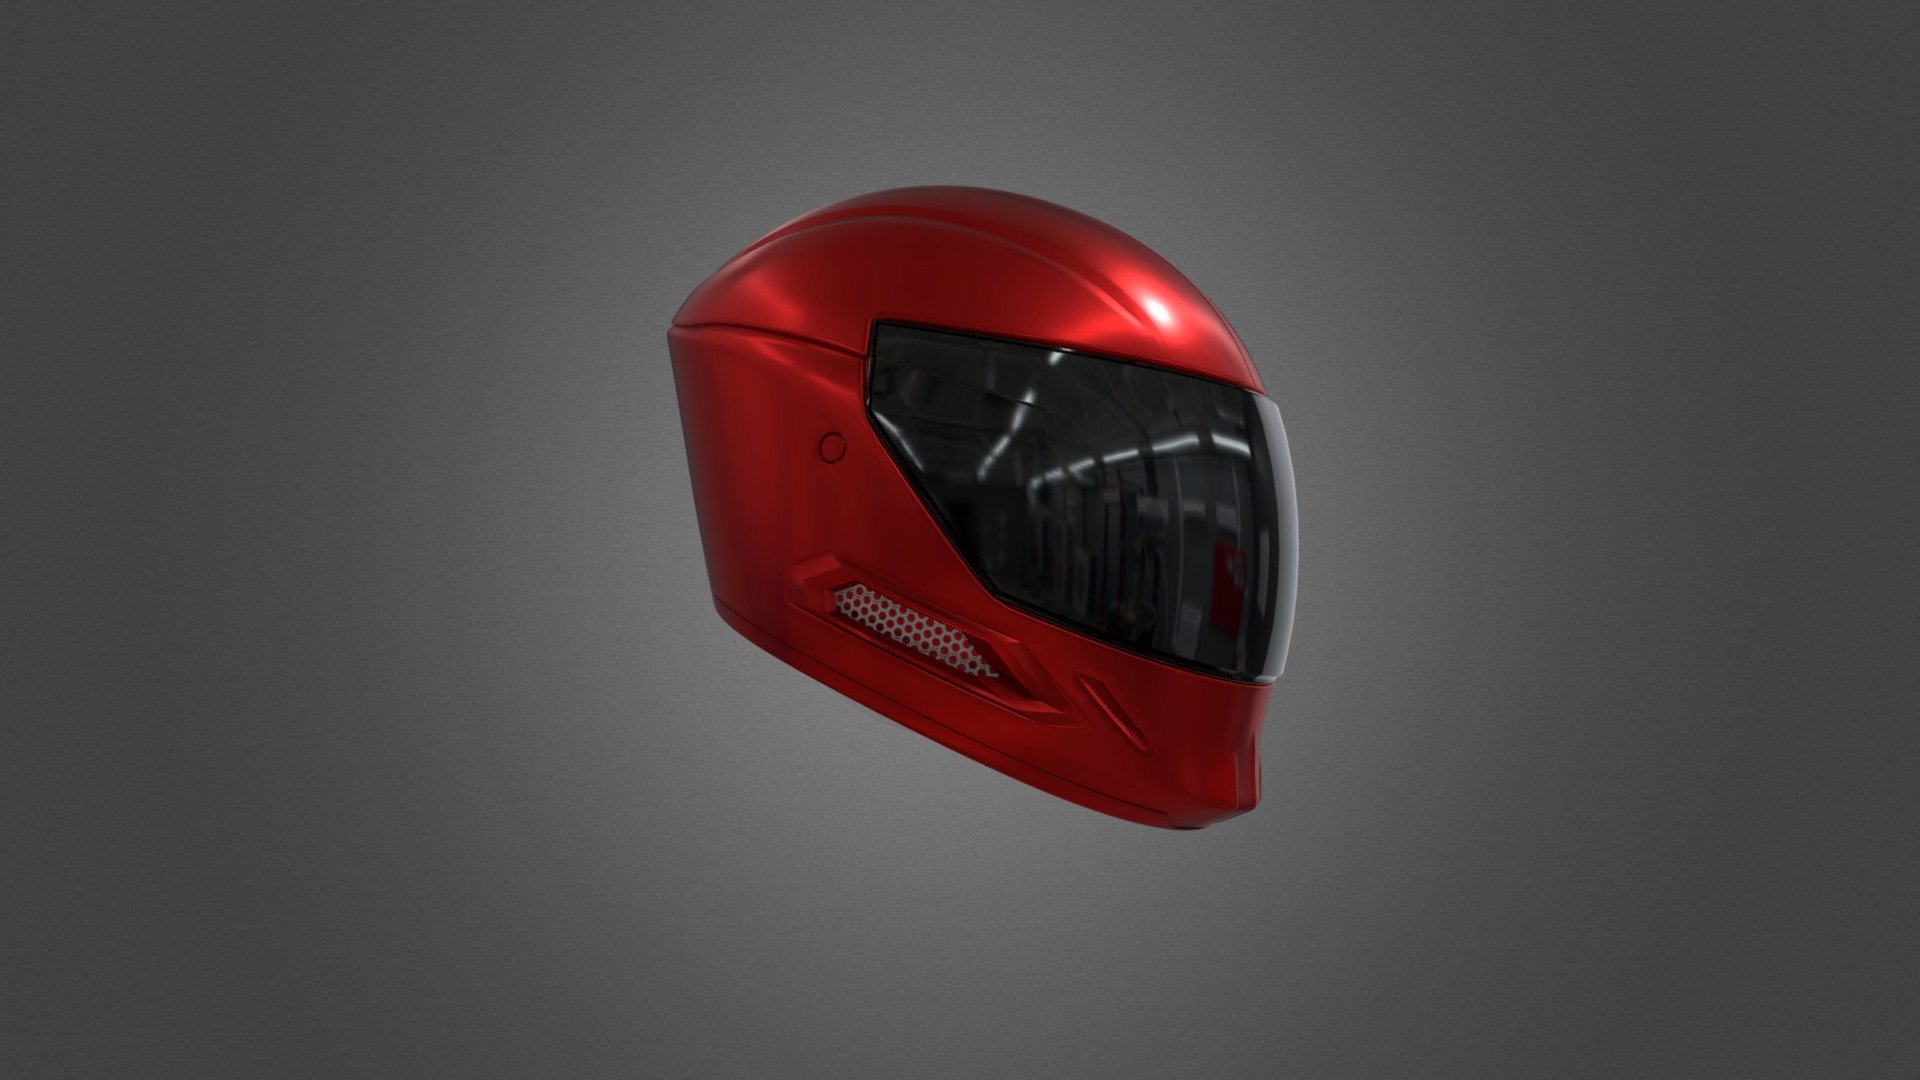 A recent model I made under the maya training of Elementza. He is awesome if you want to learn 3d modelling to a high, clean standard. 

Link to his channel here: https://www.youtube.com/c/Elementza - Elementza Bike Helmet - Download Free 3D model by BasedOptimal 3d model